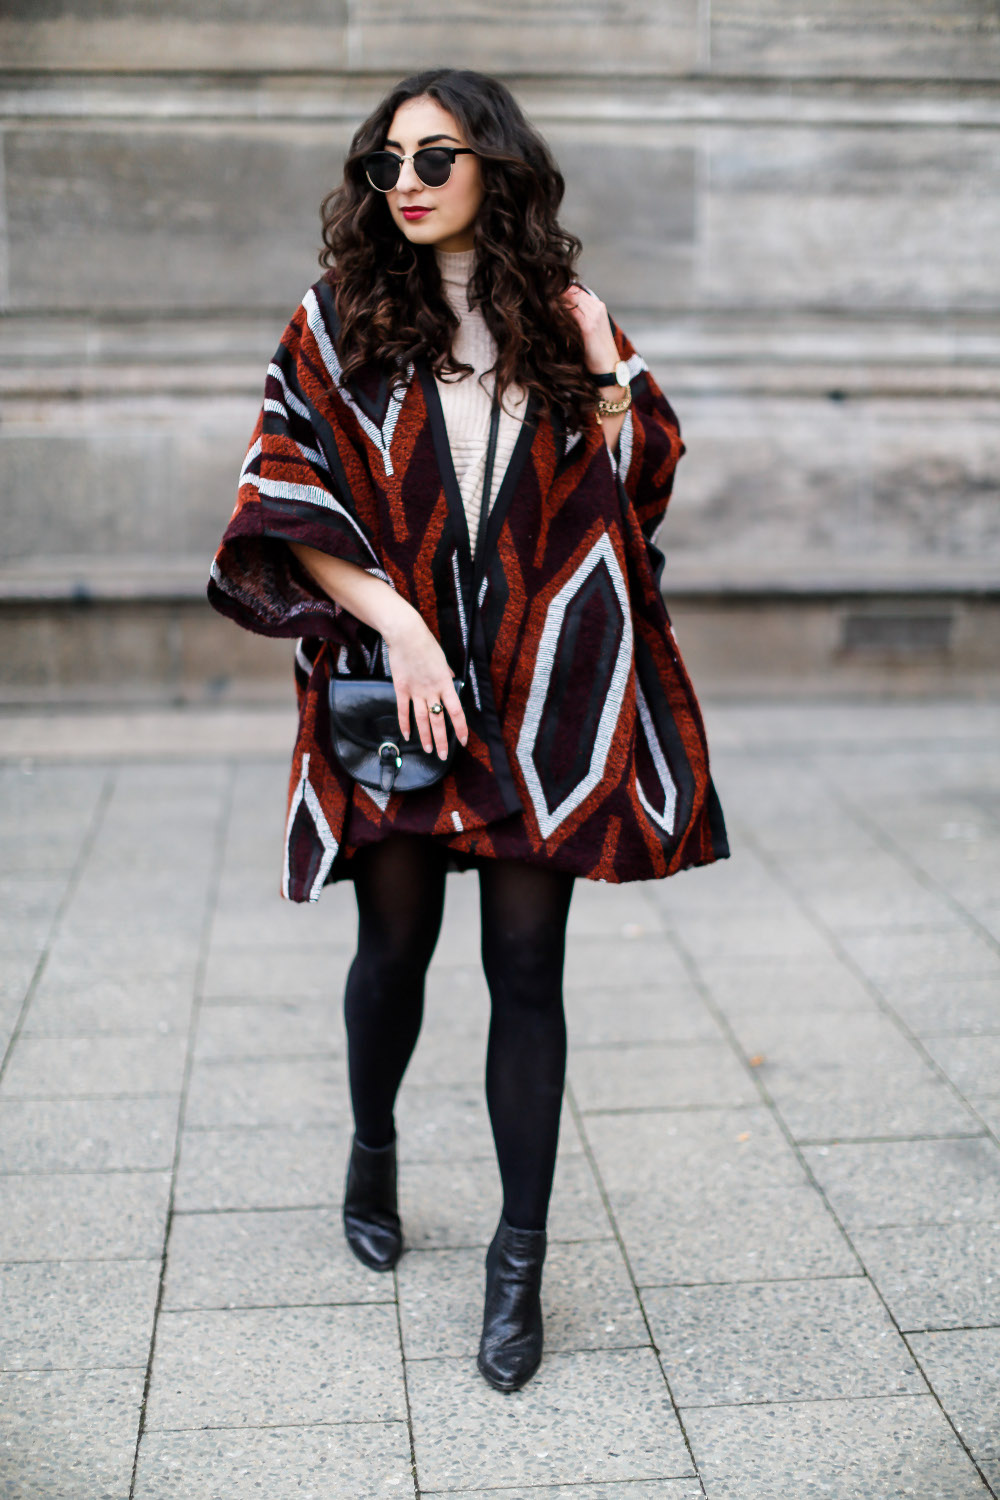 Mango Cape and Leather Shorts streetstyle winterspring frühlings outfit look aztec poncho fashionblog wie poncho kombinieren how to cape samieze 